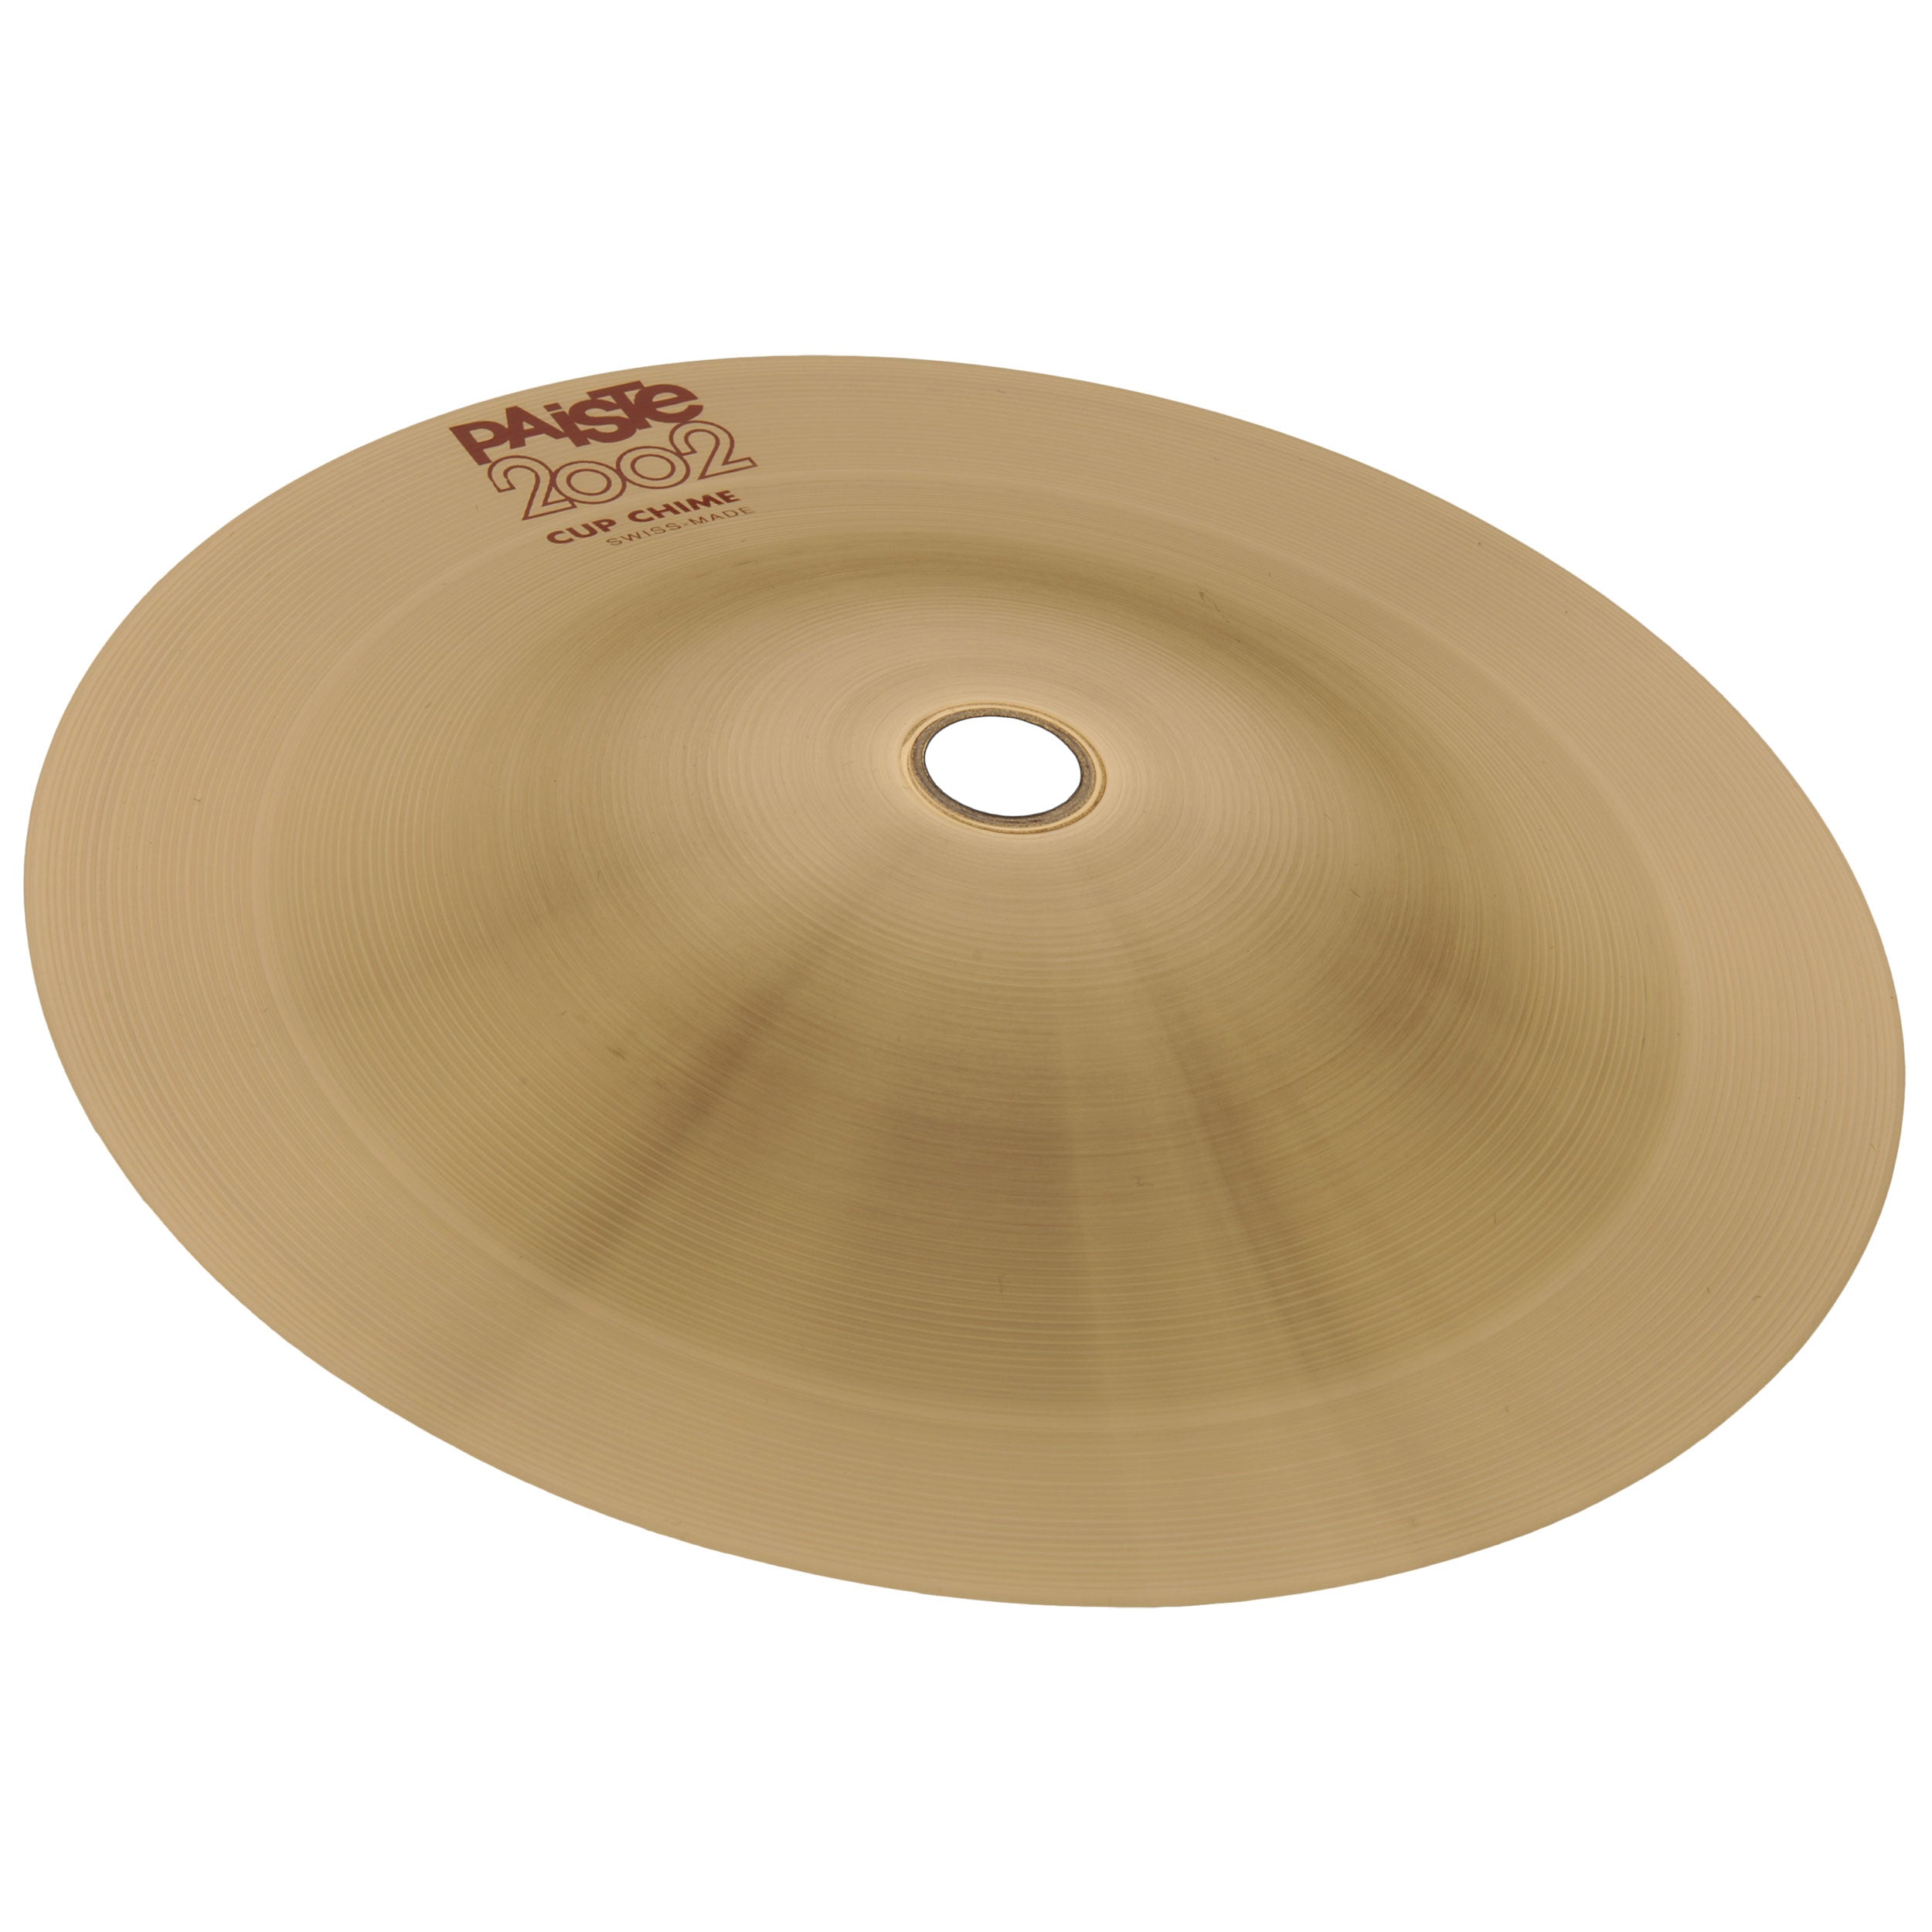 Paiste 2002 Series 7.5" Cup Chime Cymbal